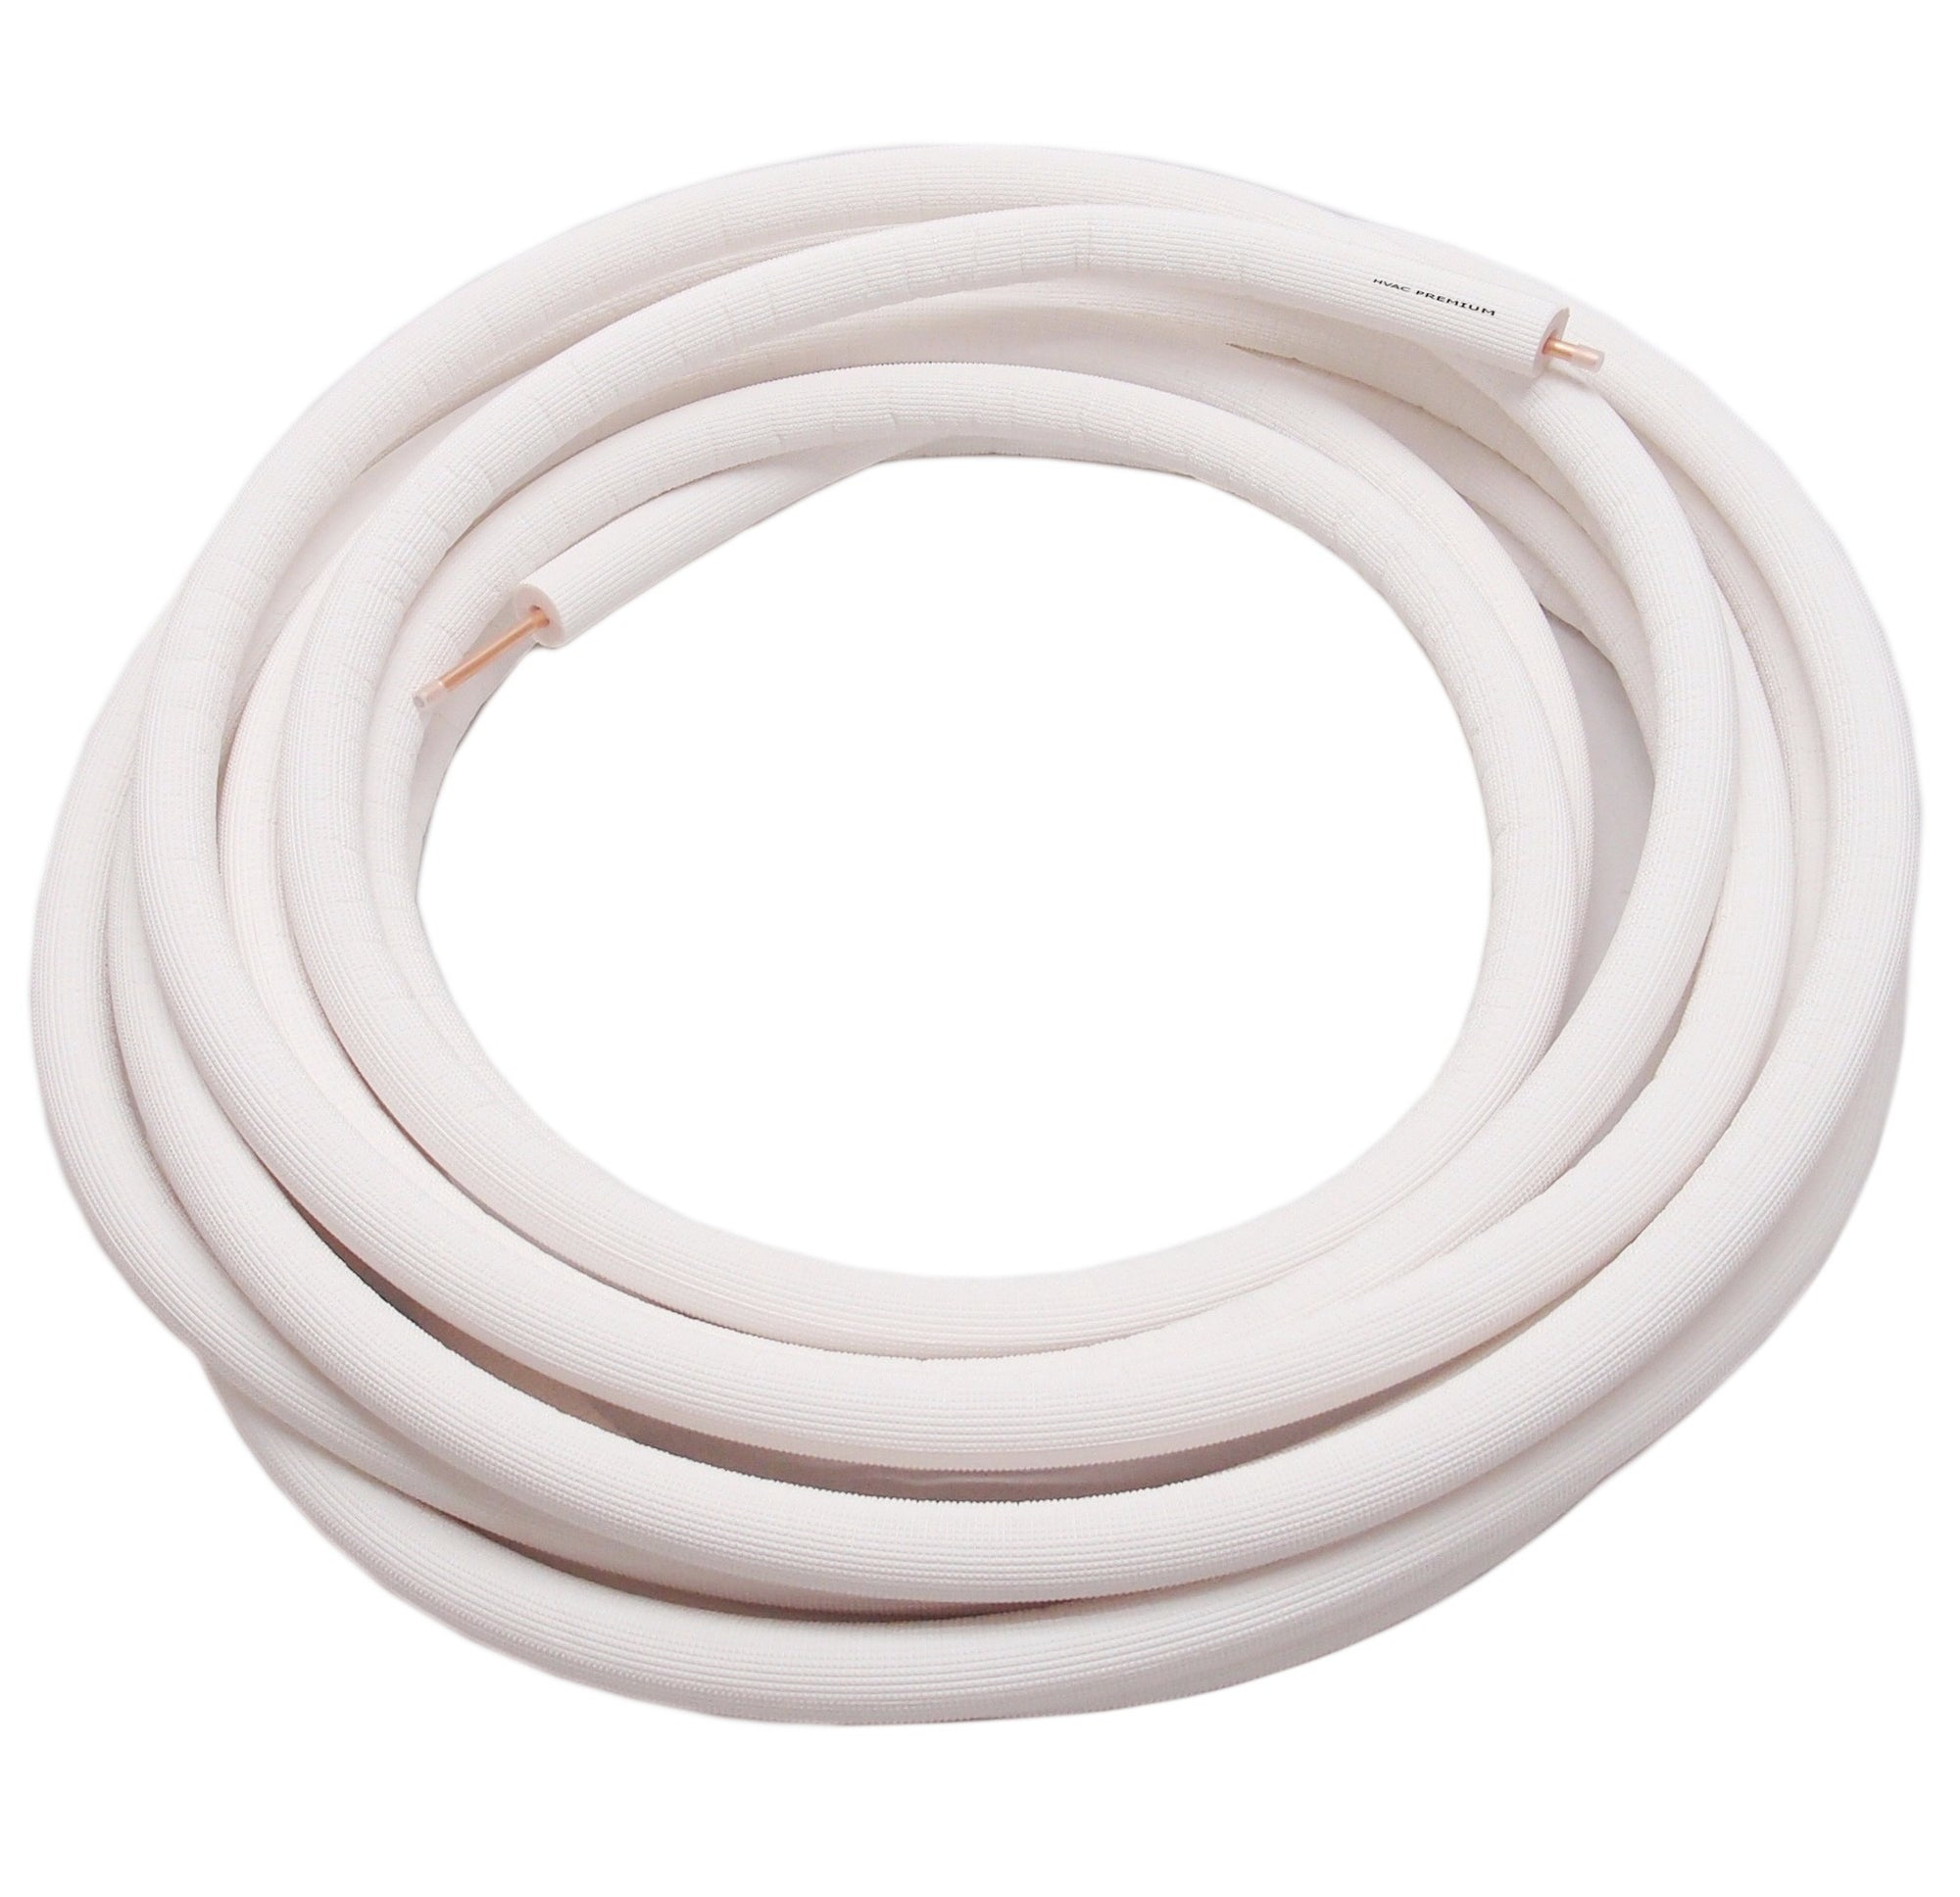 1/2" Insulated Copper Coil Line - Seamless Pipe Tube for HVAC, Refrigerant - 1/2" White Insulation - 25' Long